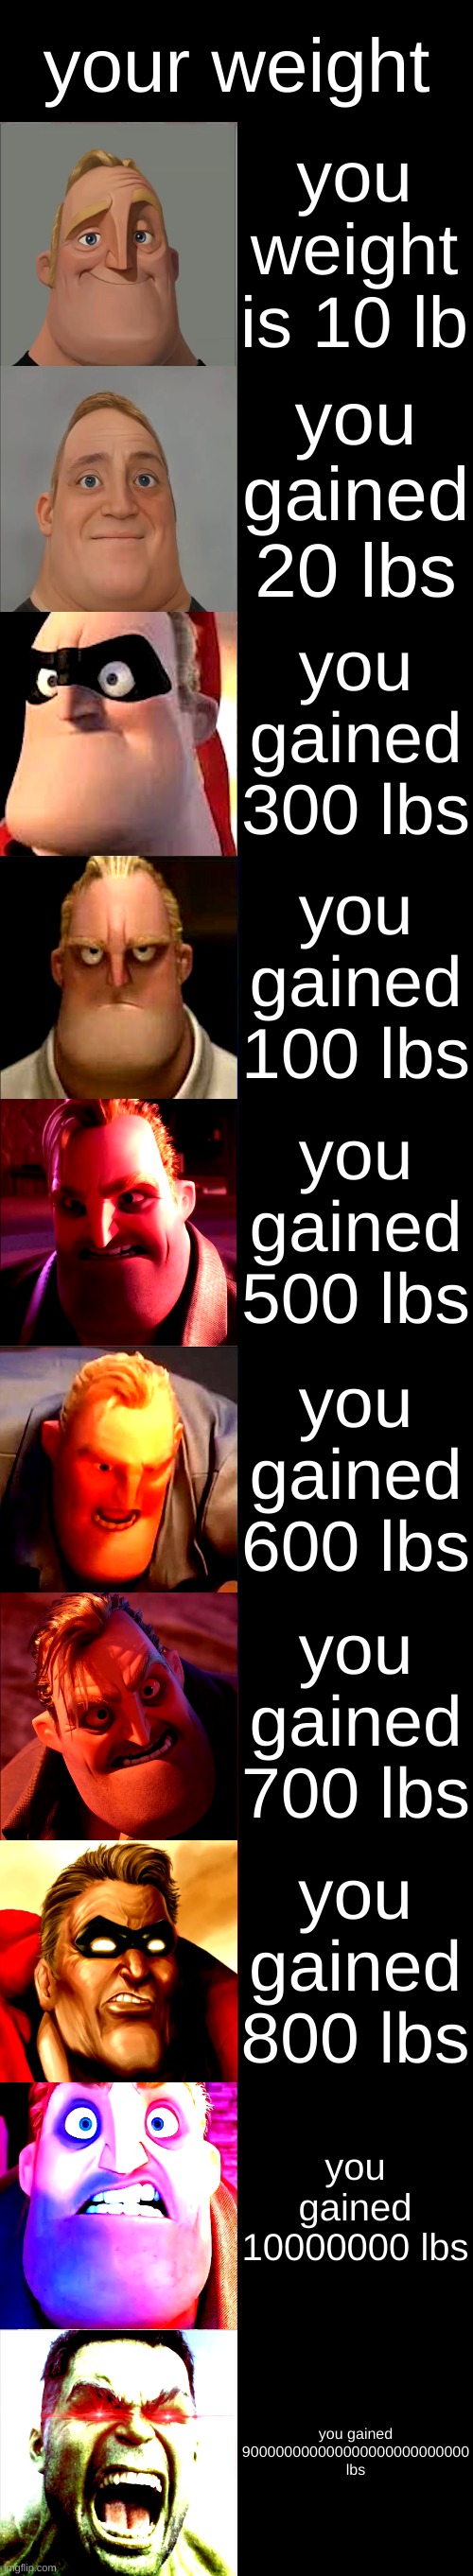 mr incredible becoming angry (weight) | your weight; you weight is 10 lb; you gained 20 lbs; you gained 300 lbs; you gained 100 lbs; you gained 500 lbs; you gained 600 lbs; you gained 700 lbs; you gained 800 lbs; you gained 10000000 lbs; you gained 900000000000000000000000000
lbs | image tagged in mr incredible becoming angry | made w/ Imgflip meme maker